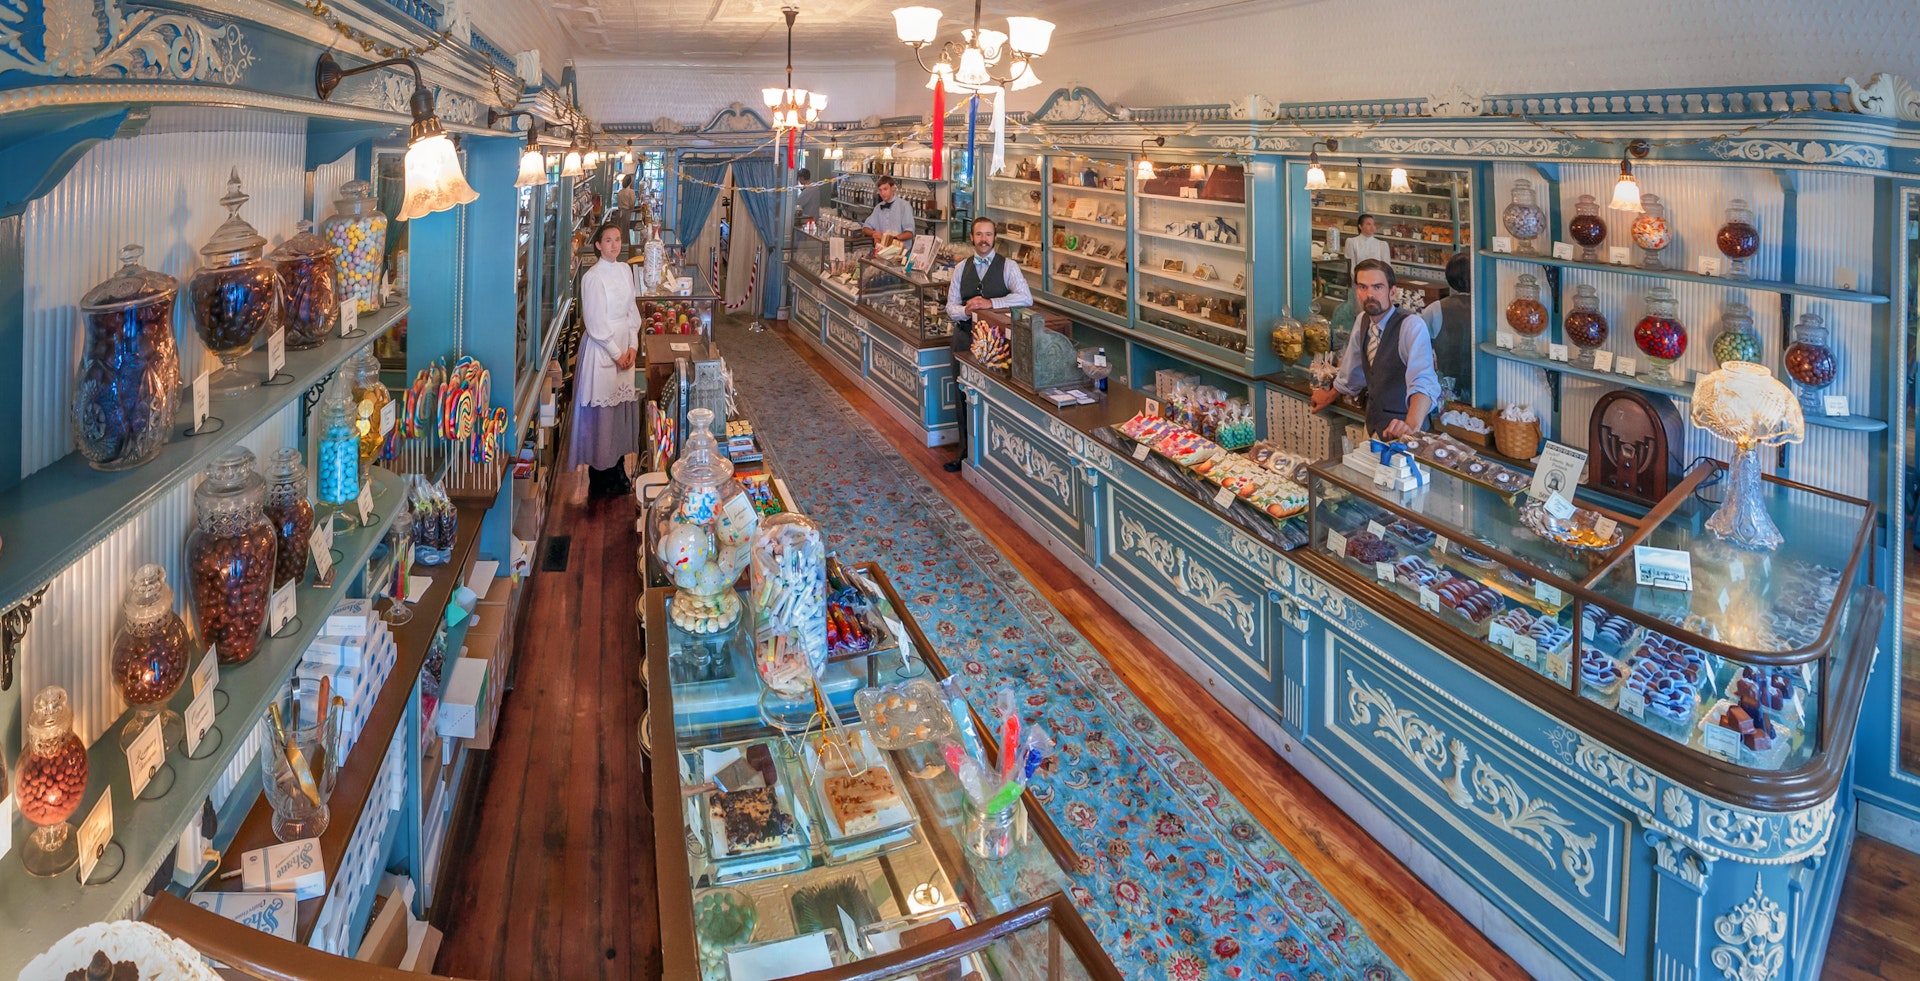 Staff members work in Shane Confectionery in Philadelphia, with an old-style blue and white interior